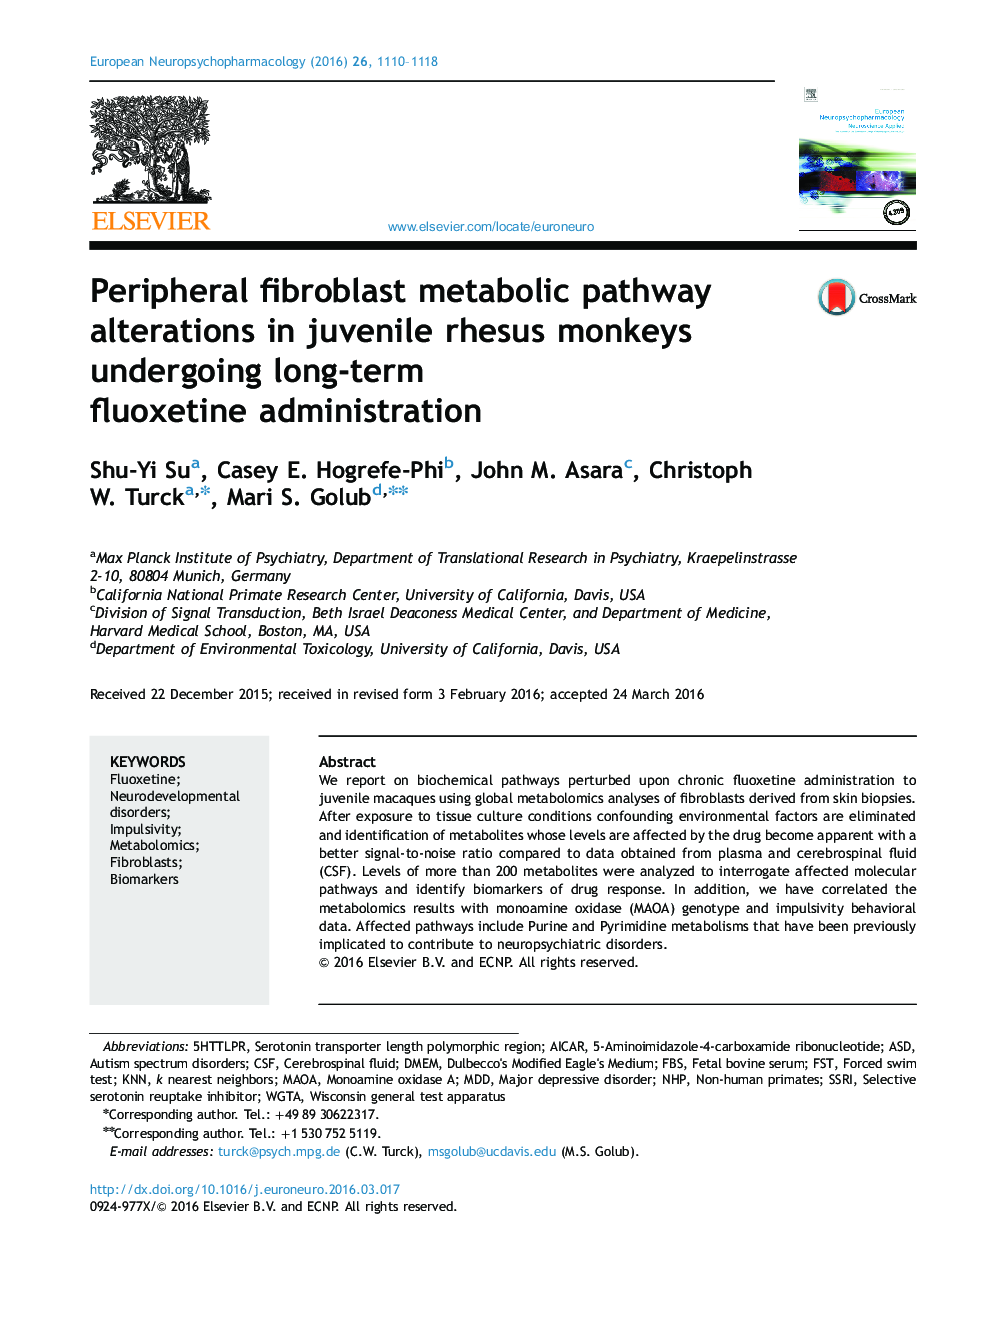 Peripheral fibroblast metabolic pathway alterations in juvenile rhesus monkeys undergoing long-term fluoxetine administration